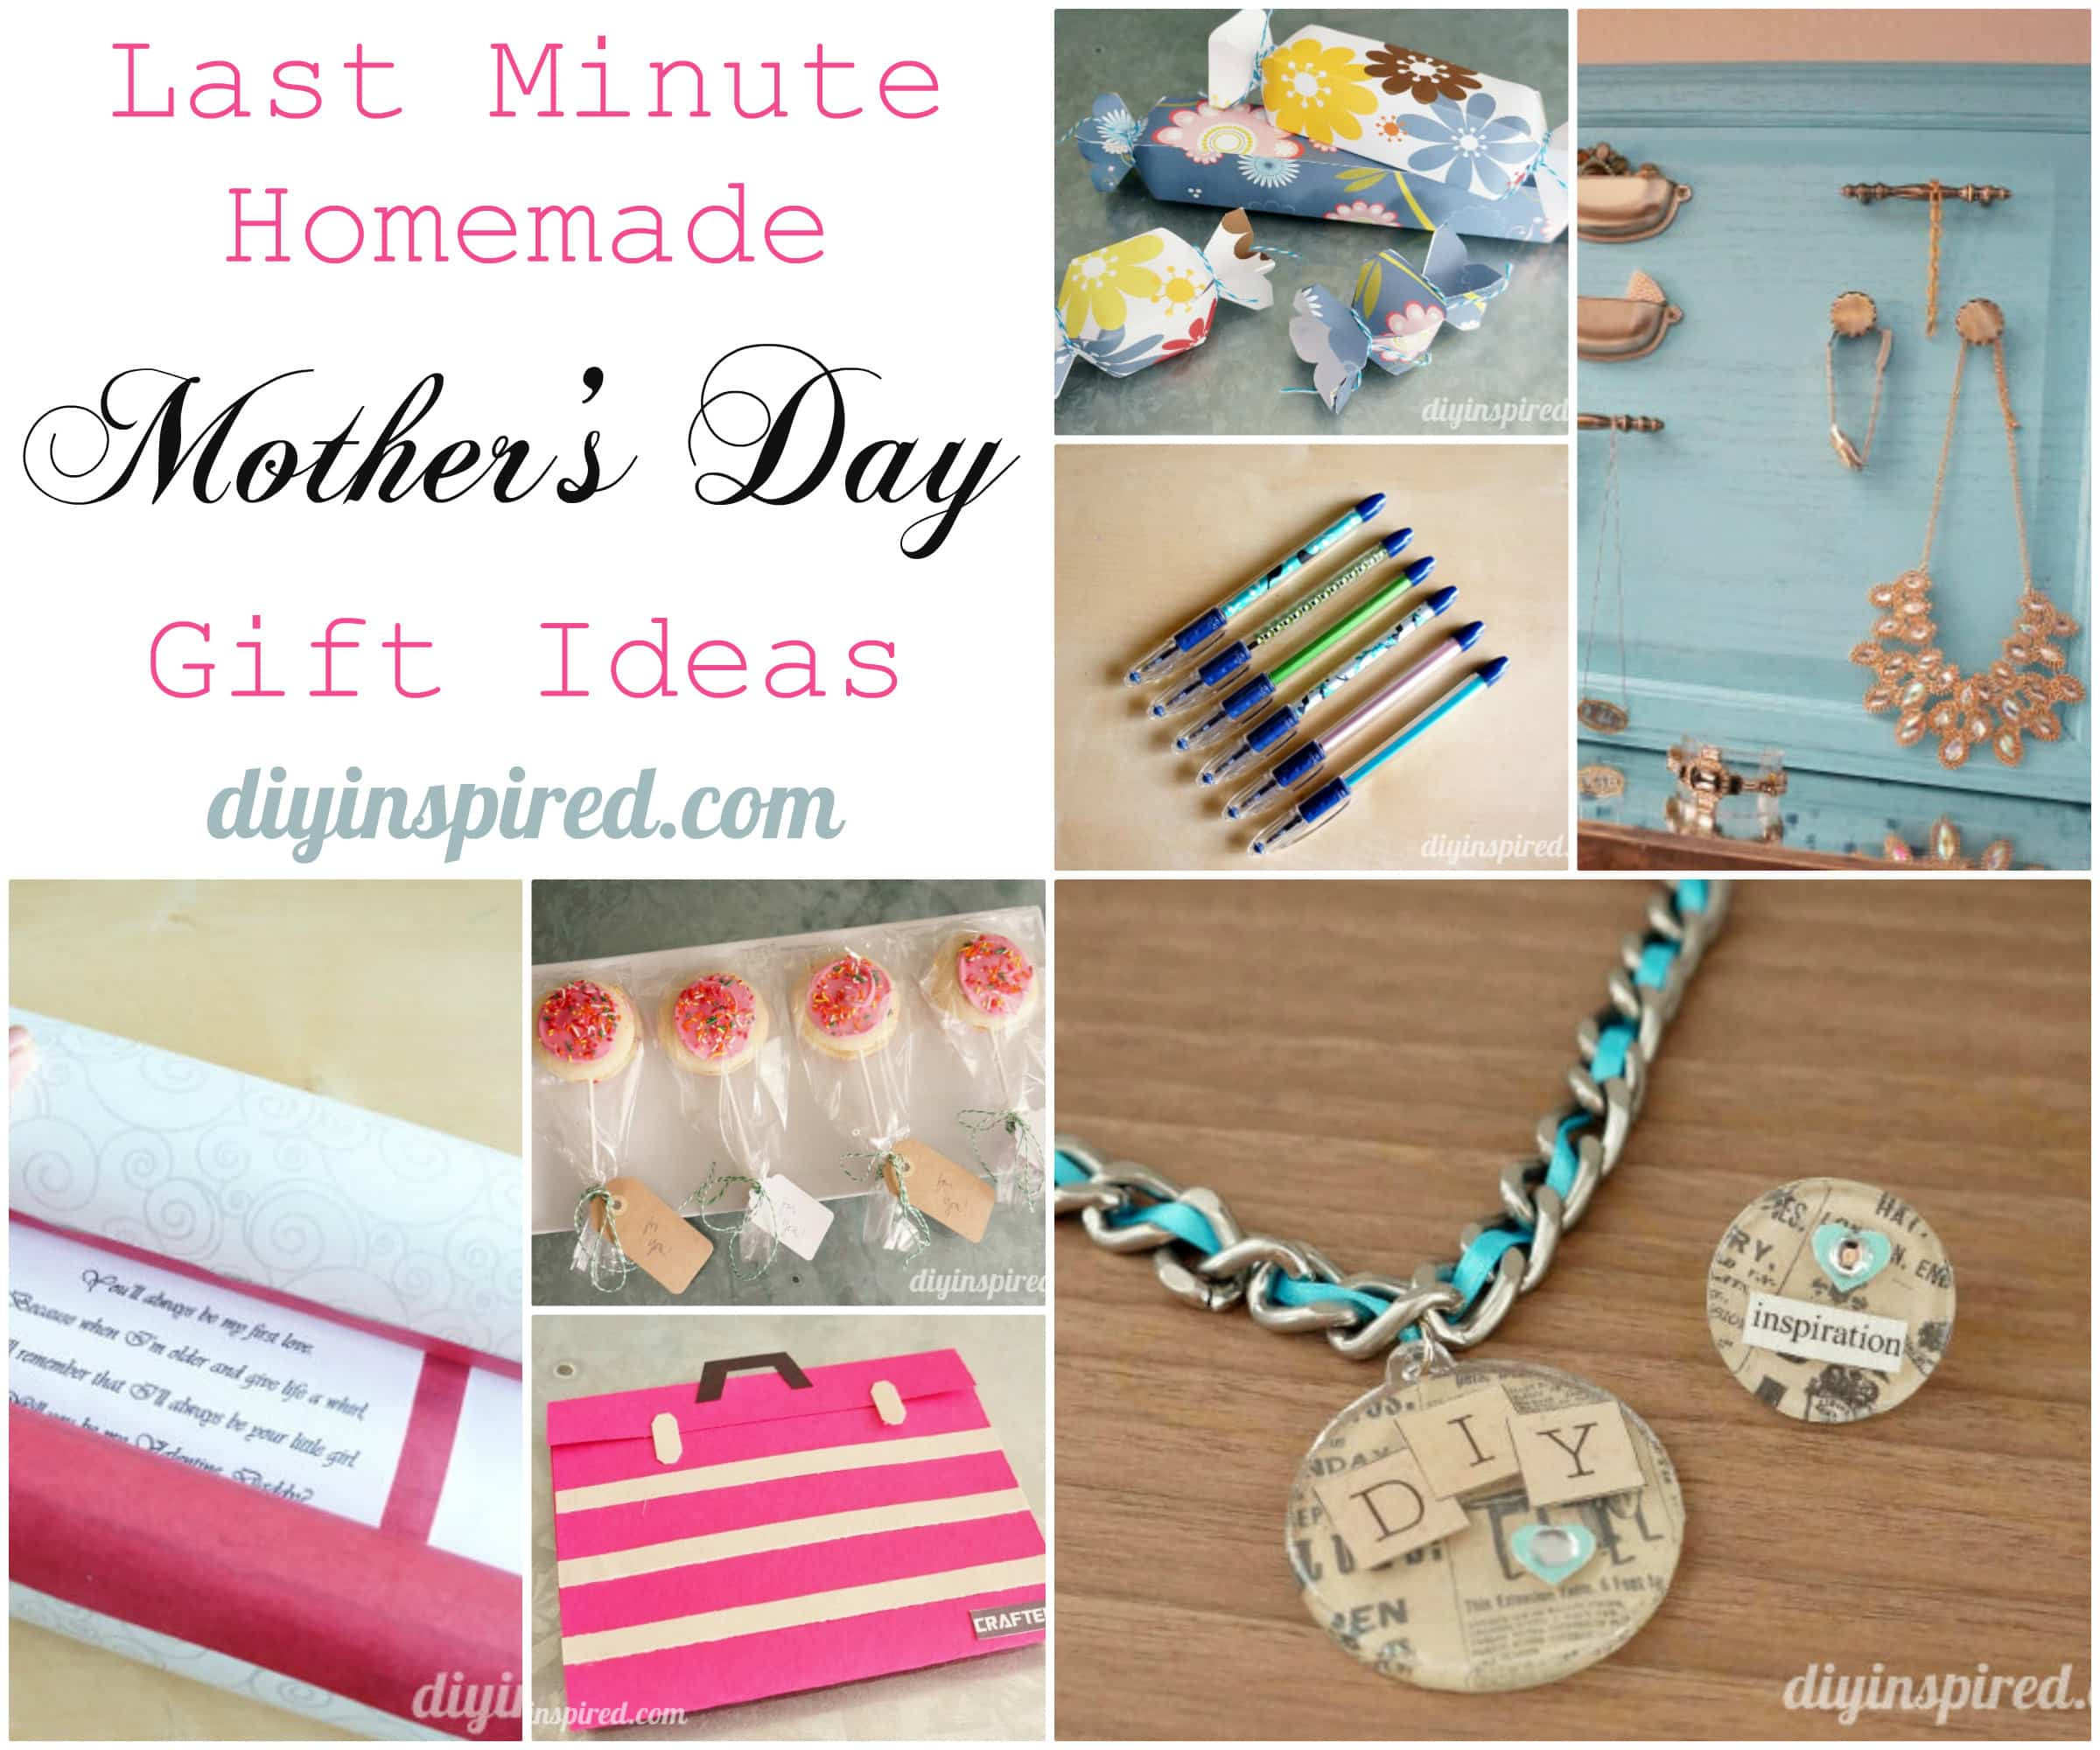 Mother Day Homemade Gift Ideas
 Last Minute Homemade Mother’s Day Gift Ideas DIY Inspired